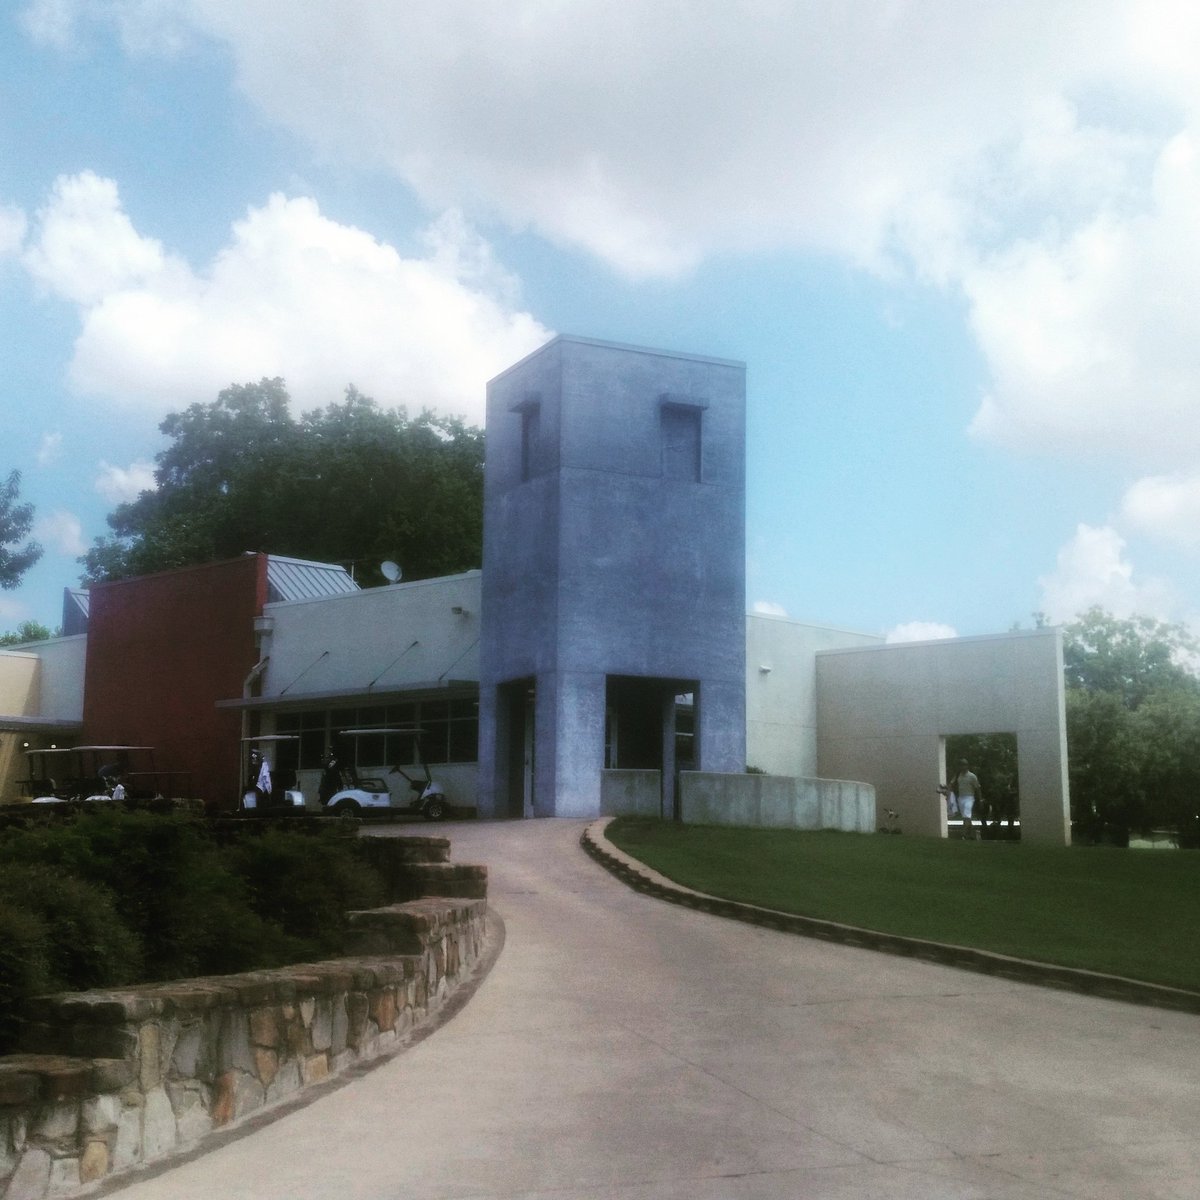 Clubhouse at Keeton Park GC. Contemporary public archt circa 70's. In the grove.  #golfdallas #dallasarchitecture